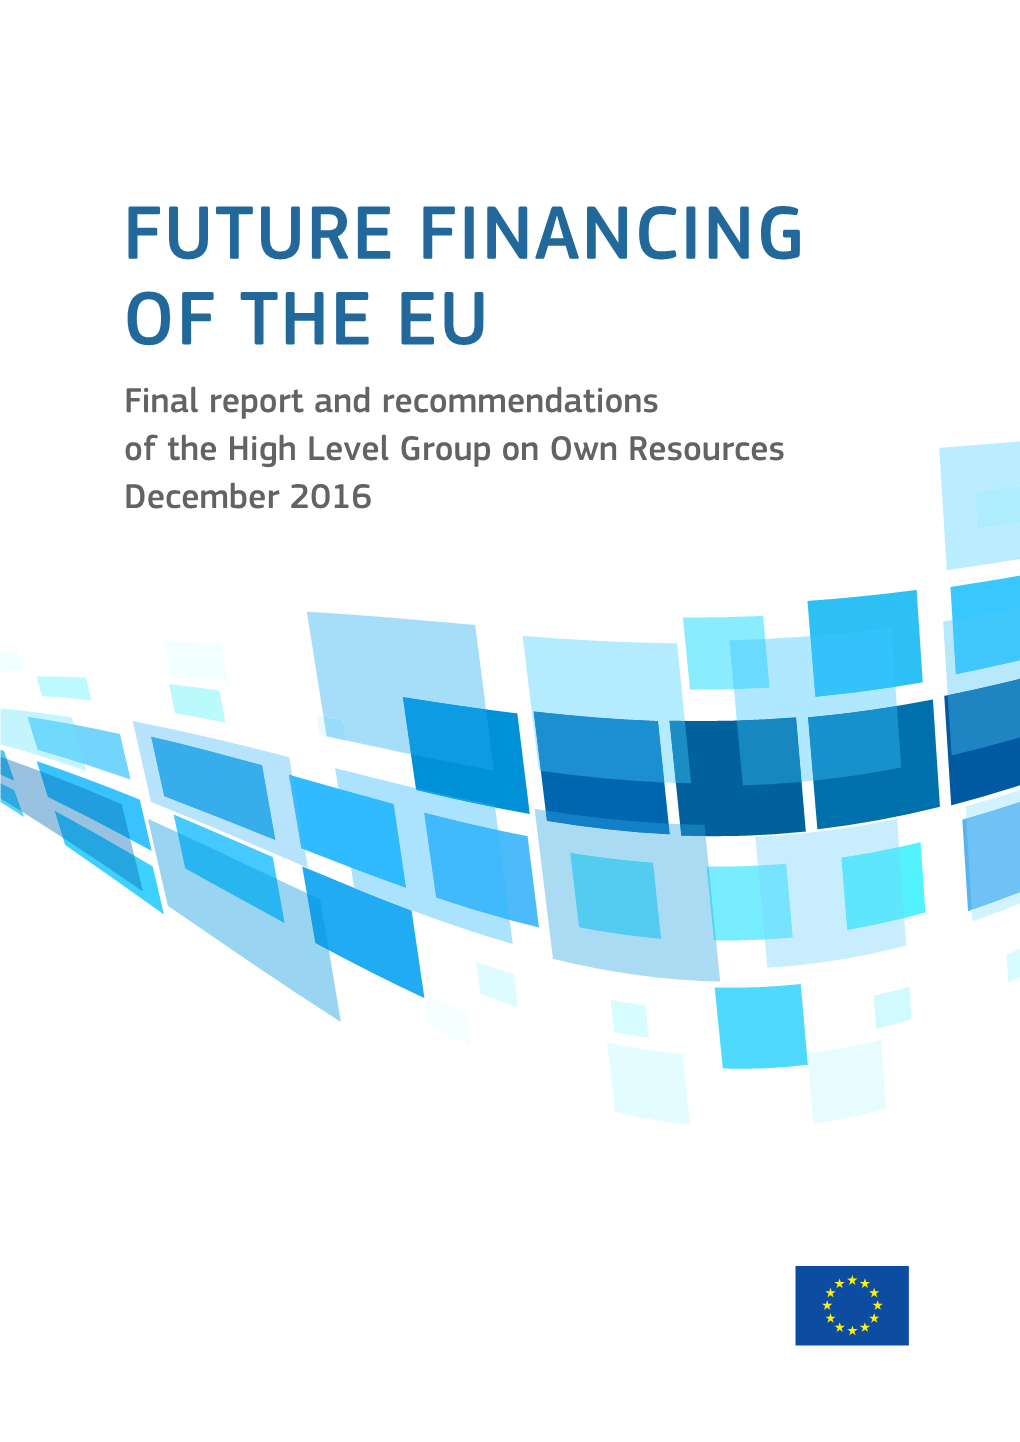 FUTURE FINANCING of the EU Final Report and Recommendations of the High Level Group on Own Resources December 2016